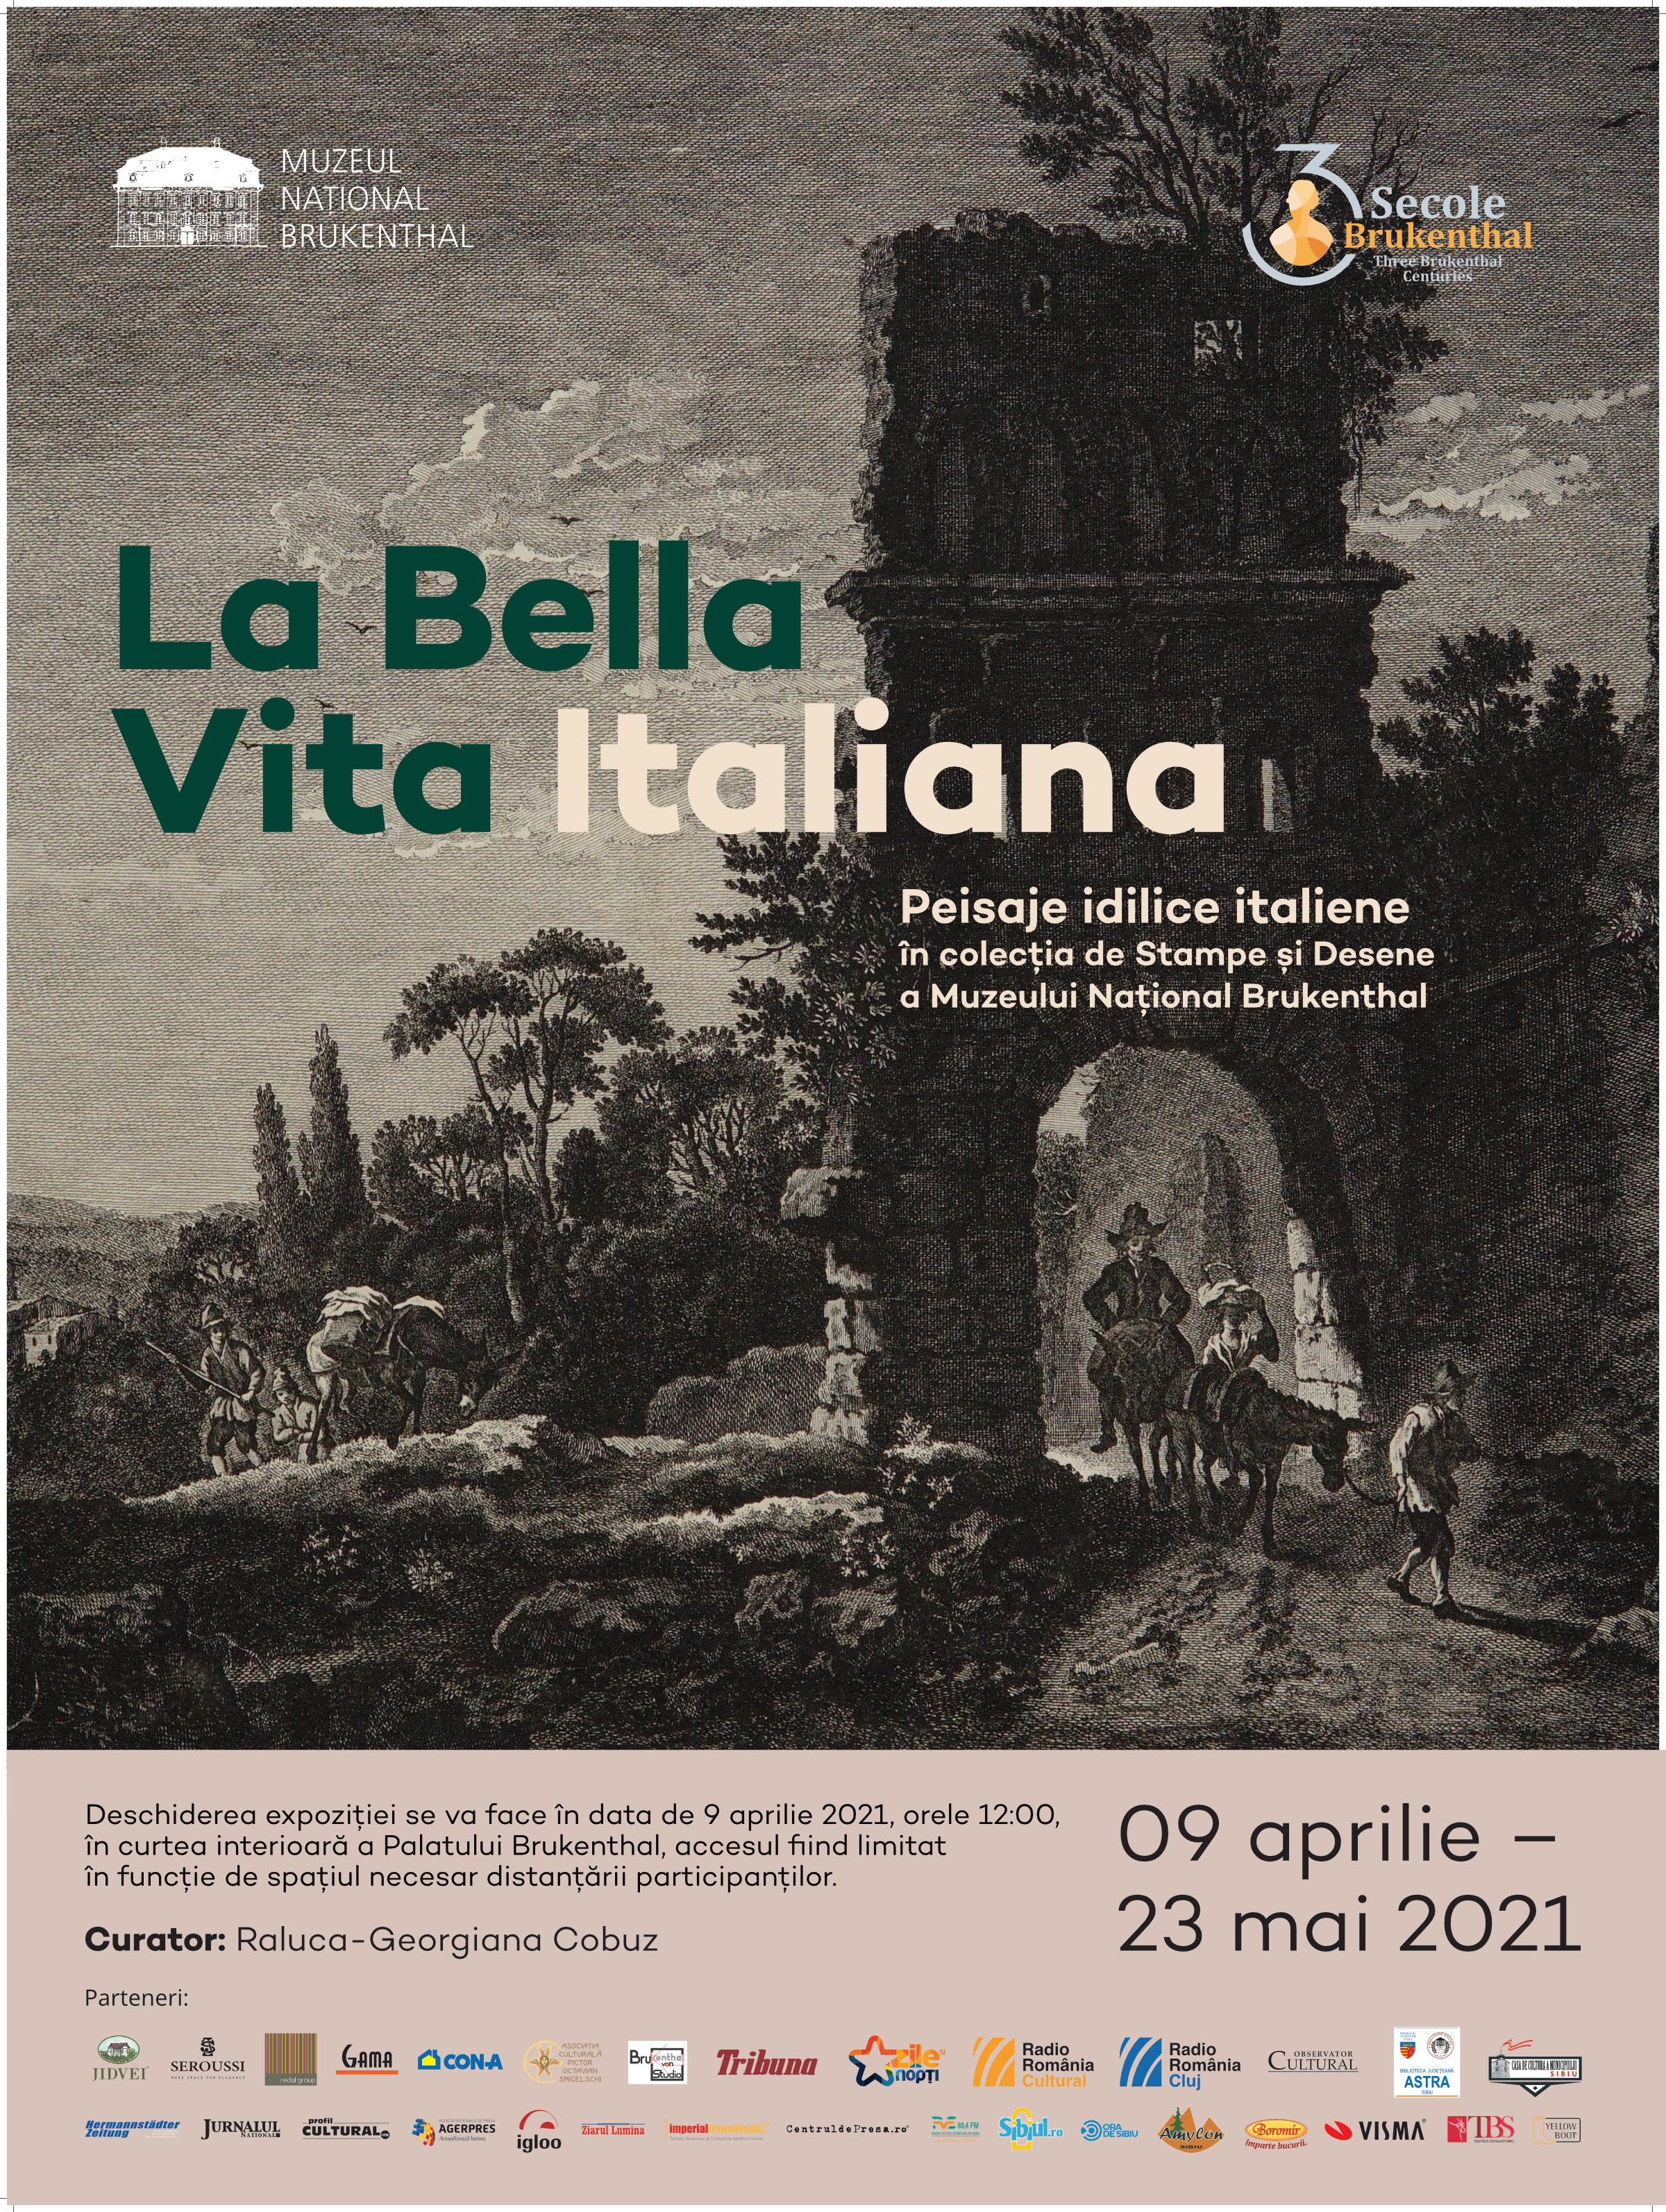 La Bella Vita Italiana. Idyllic Italian Landscapes in The Prints and Drawings Collection of the Brukenthal National Museum